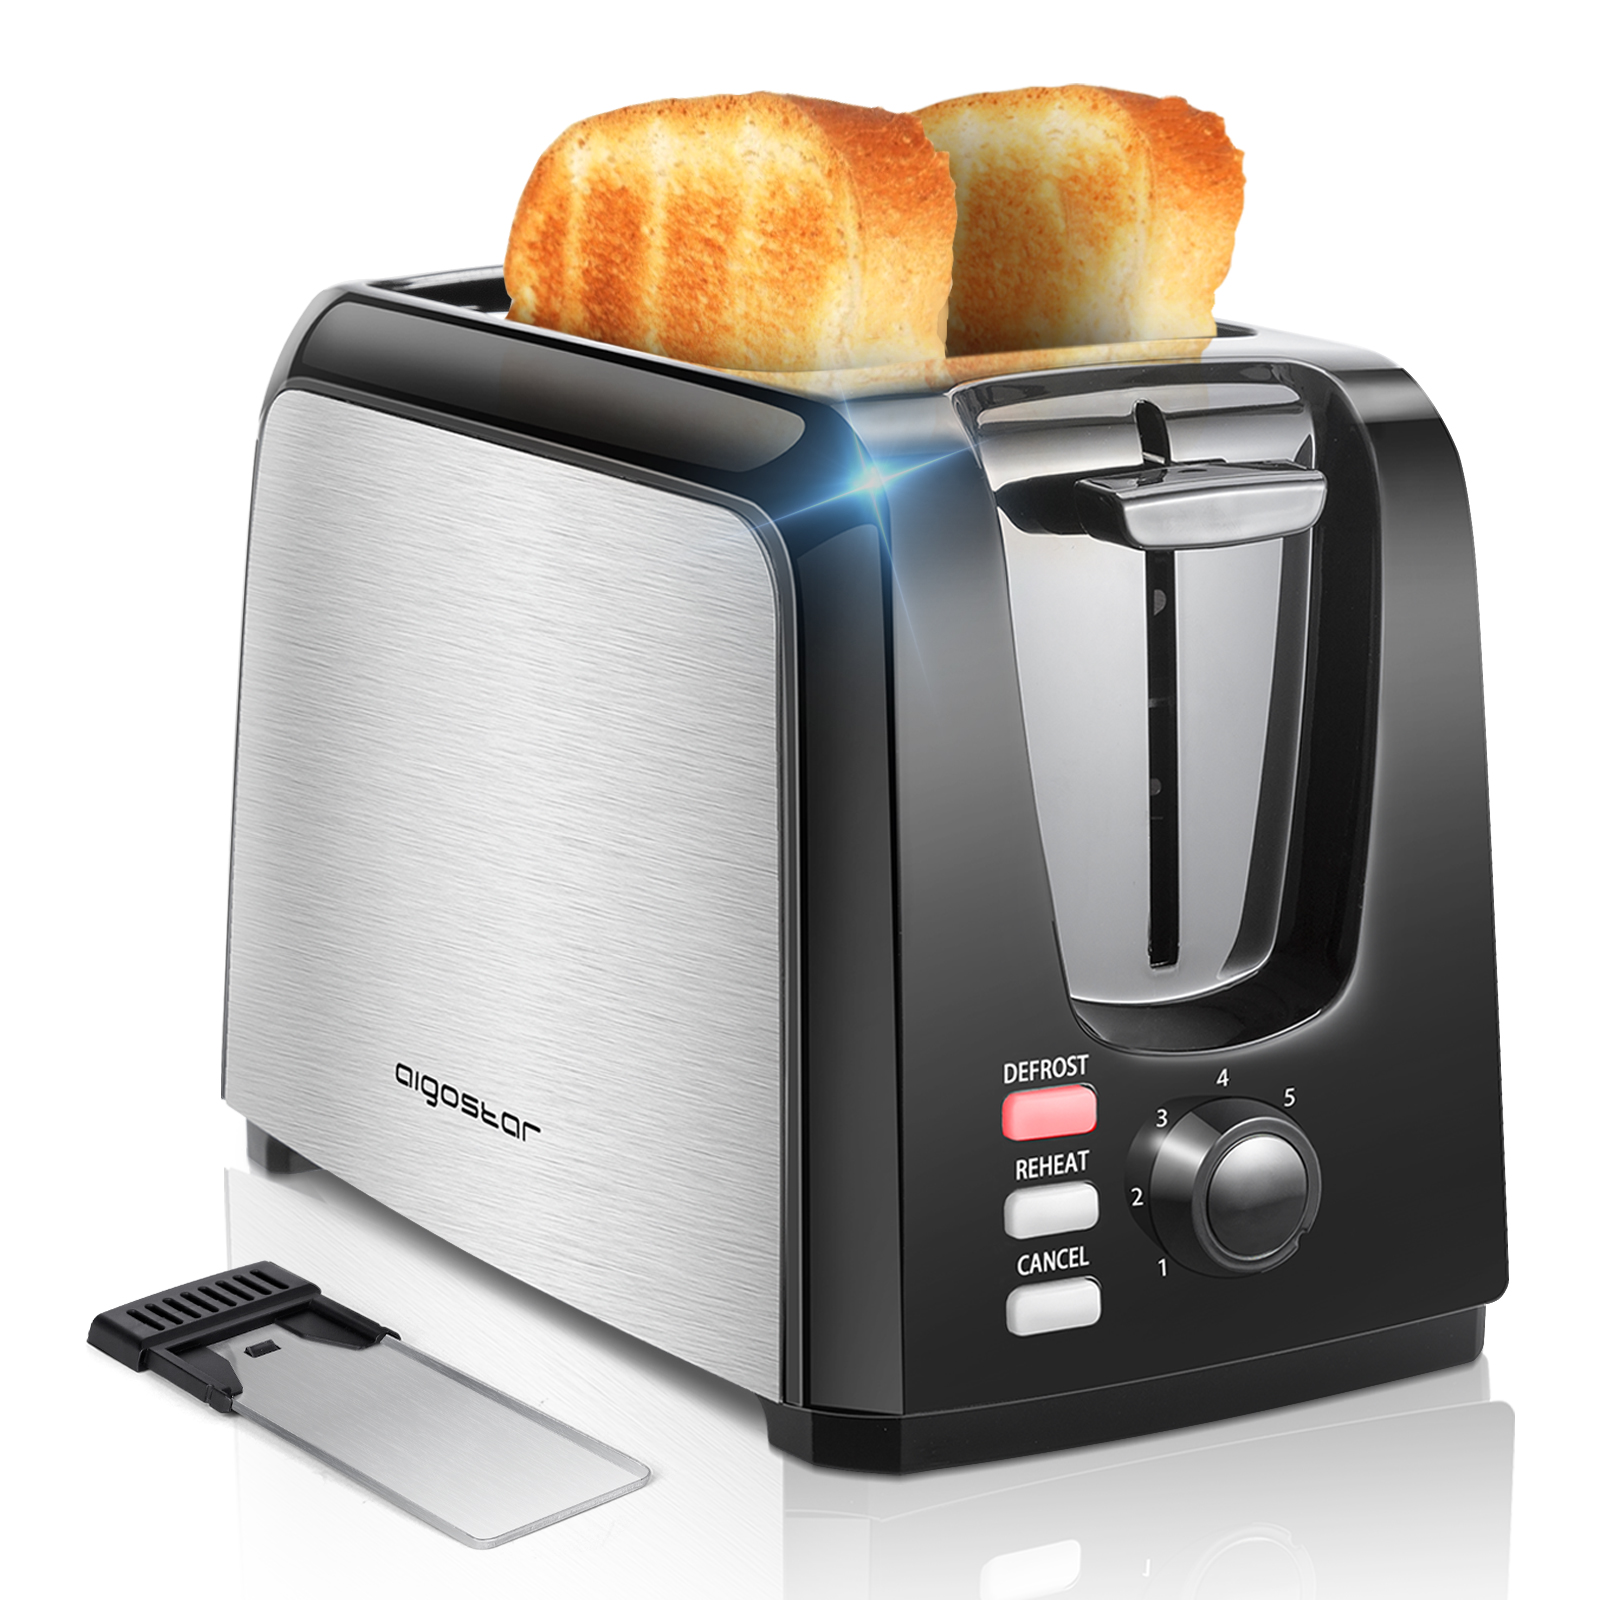 2,4 Slice Wide Toaster Bagel Toast Safe Reheat Cancel Browning Control Function 